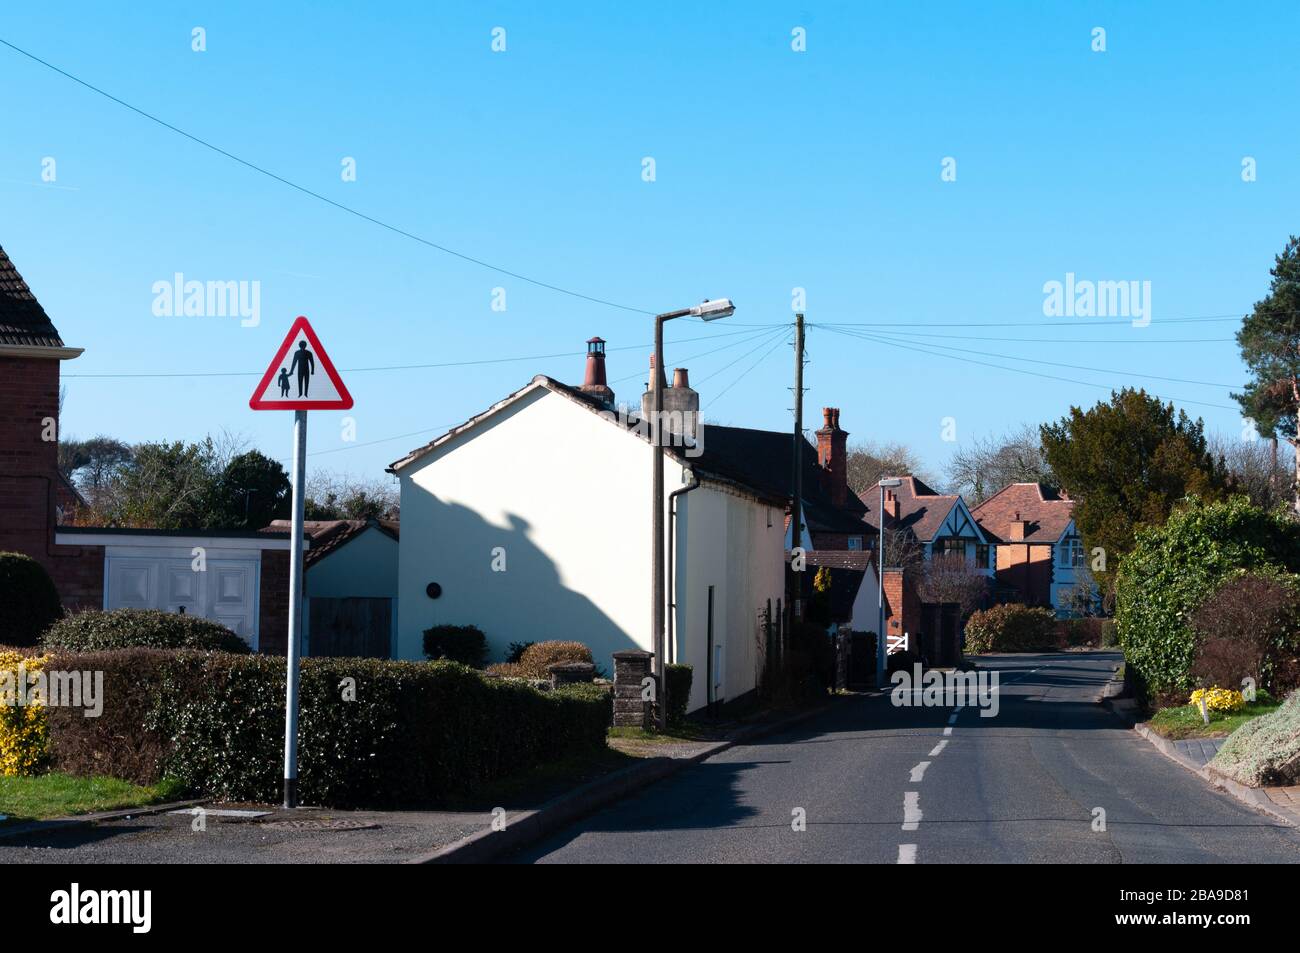 Triangular road safety warning sign for pedestrians in road or no footway. Isolated biside road. Lickey End, Bromsgrove. Stock Photo